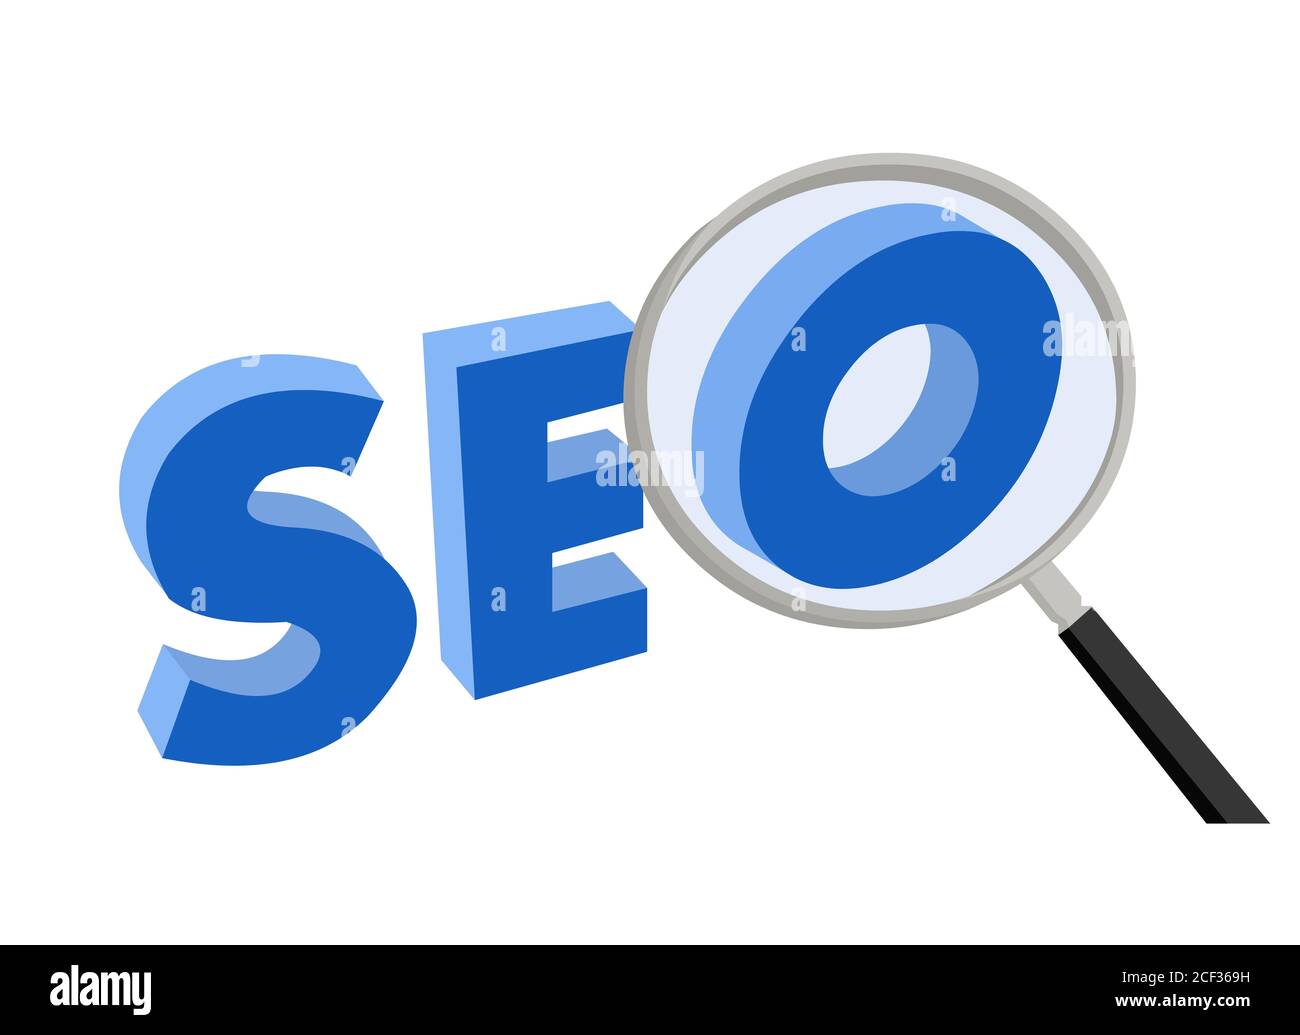 Search for seo with magnifying glass Stock Photo